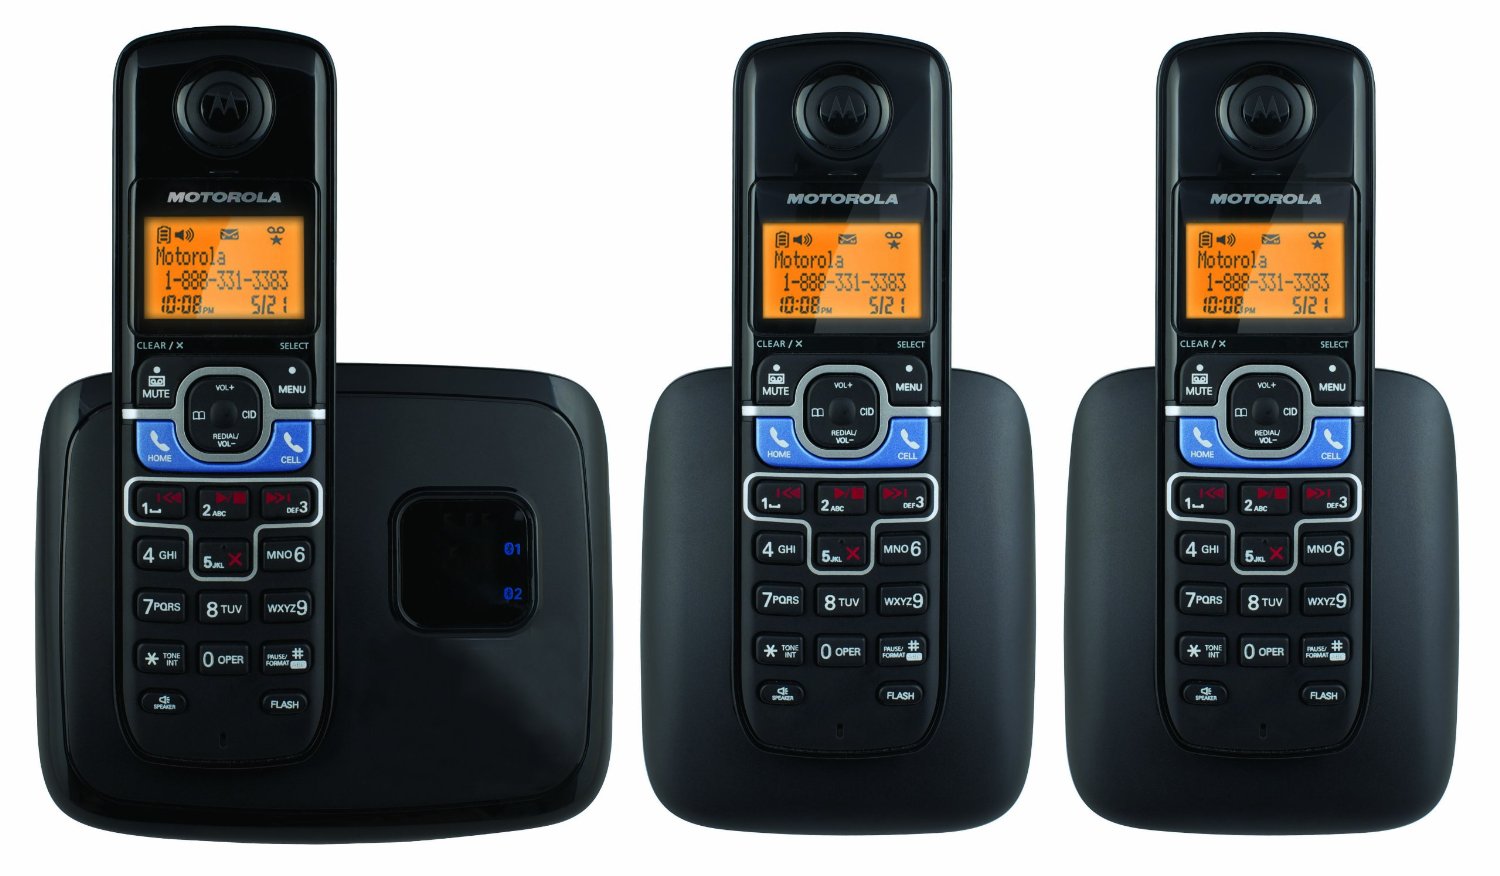 Motorola DECT 6.0 Cordless Phone with 3 Handsets, Digital Answering System and Mobile Bluetooth Linking L703BT  $61.99